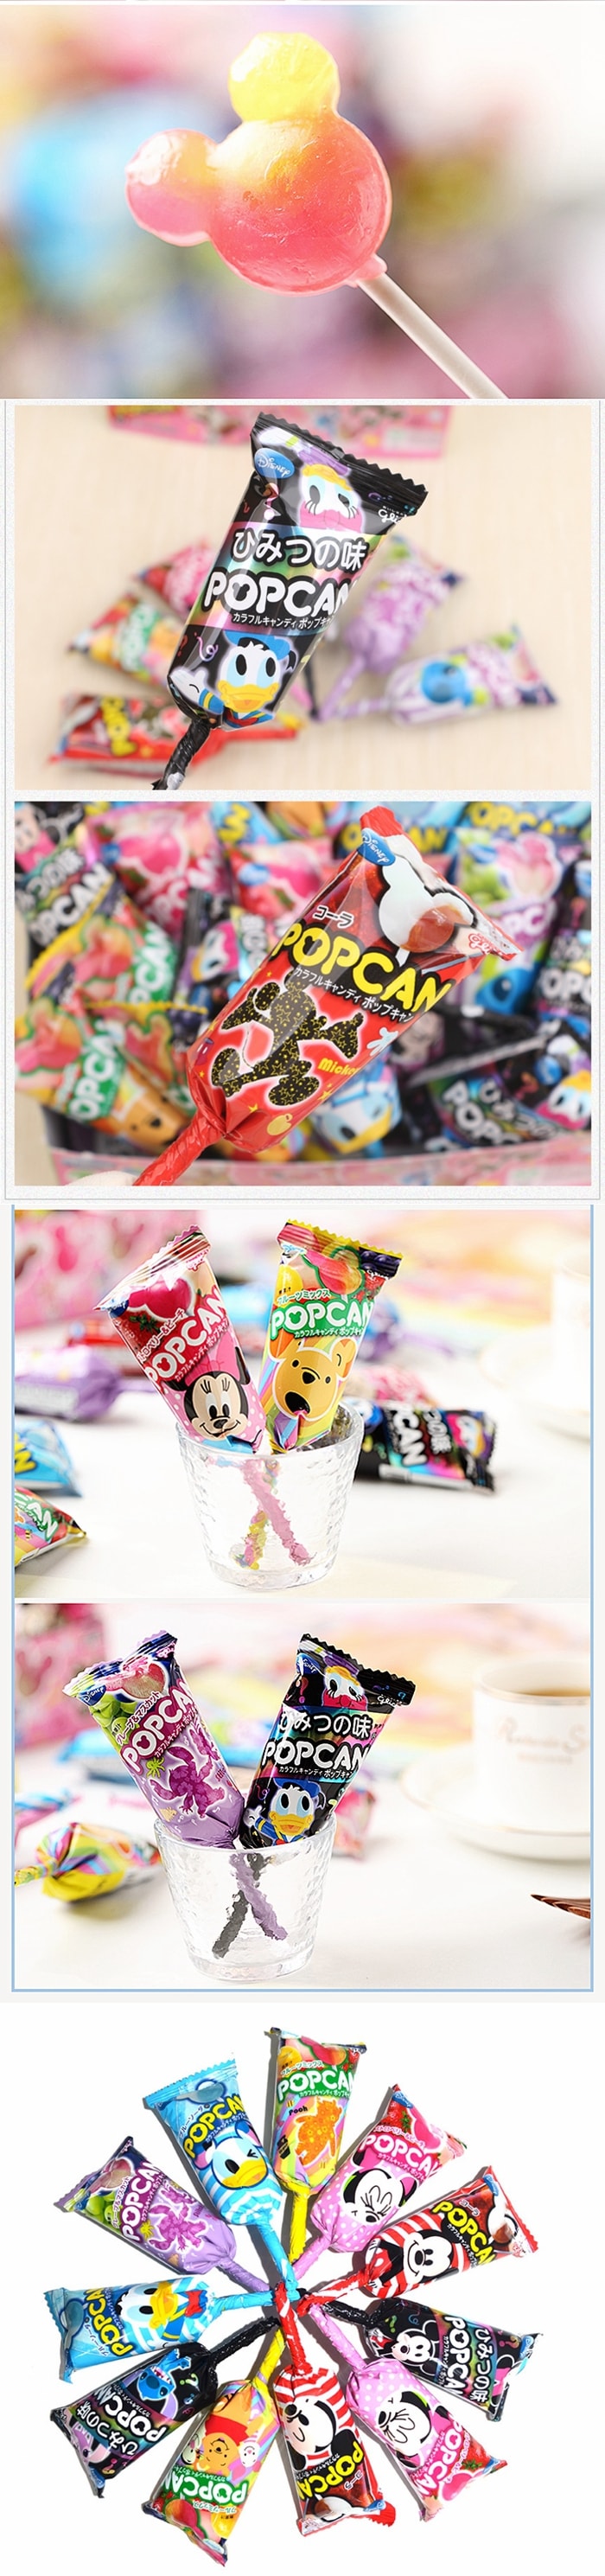 Food Snack Candy Lollipop Present Gift 1pc